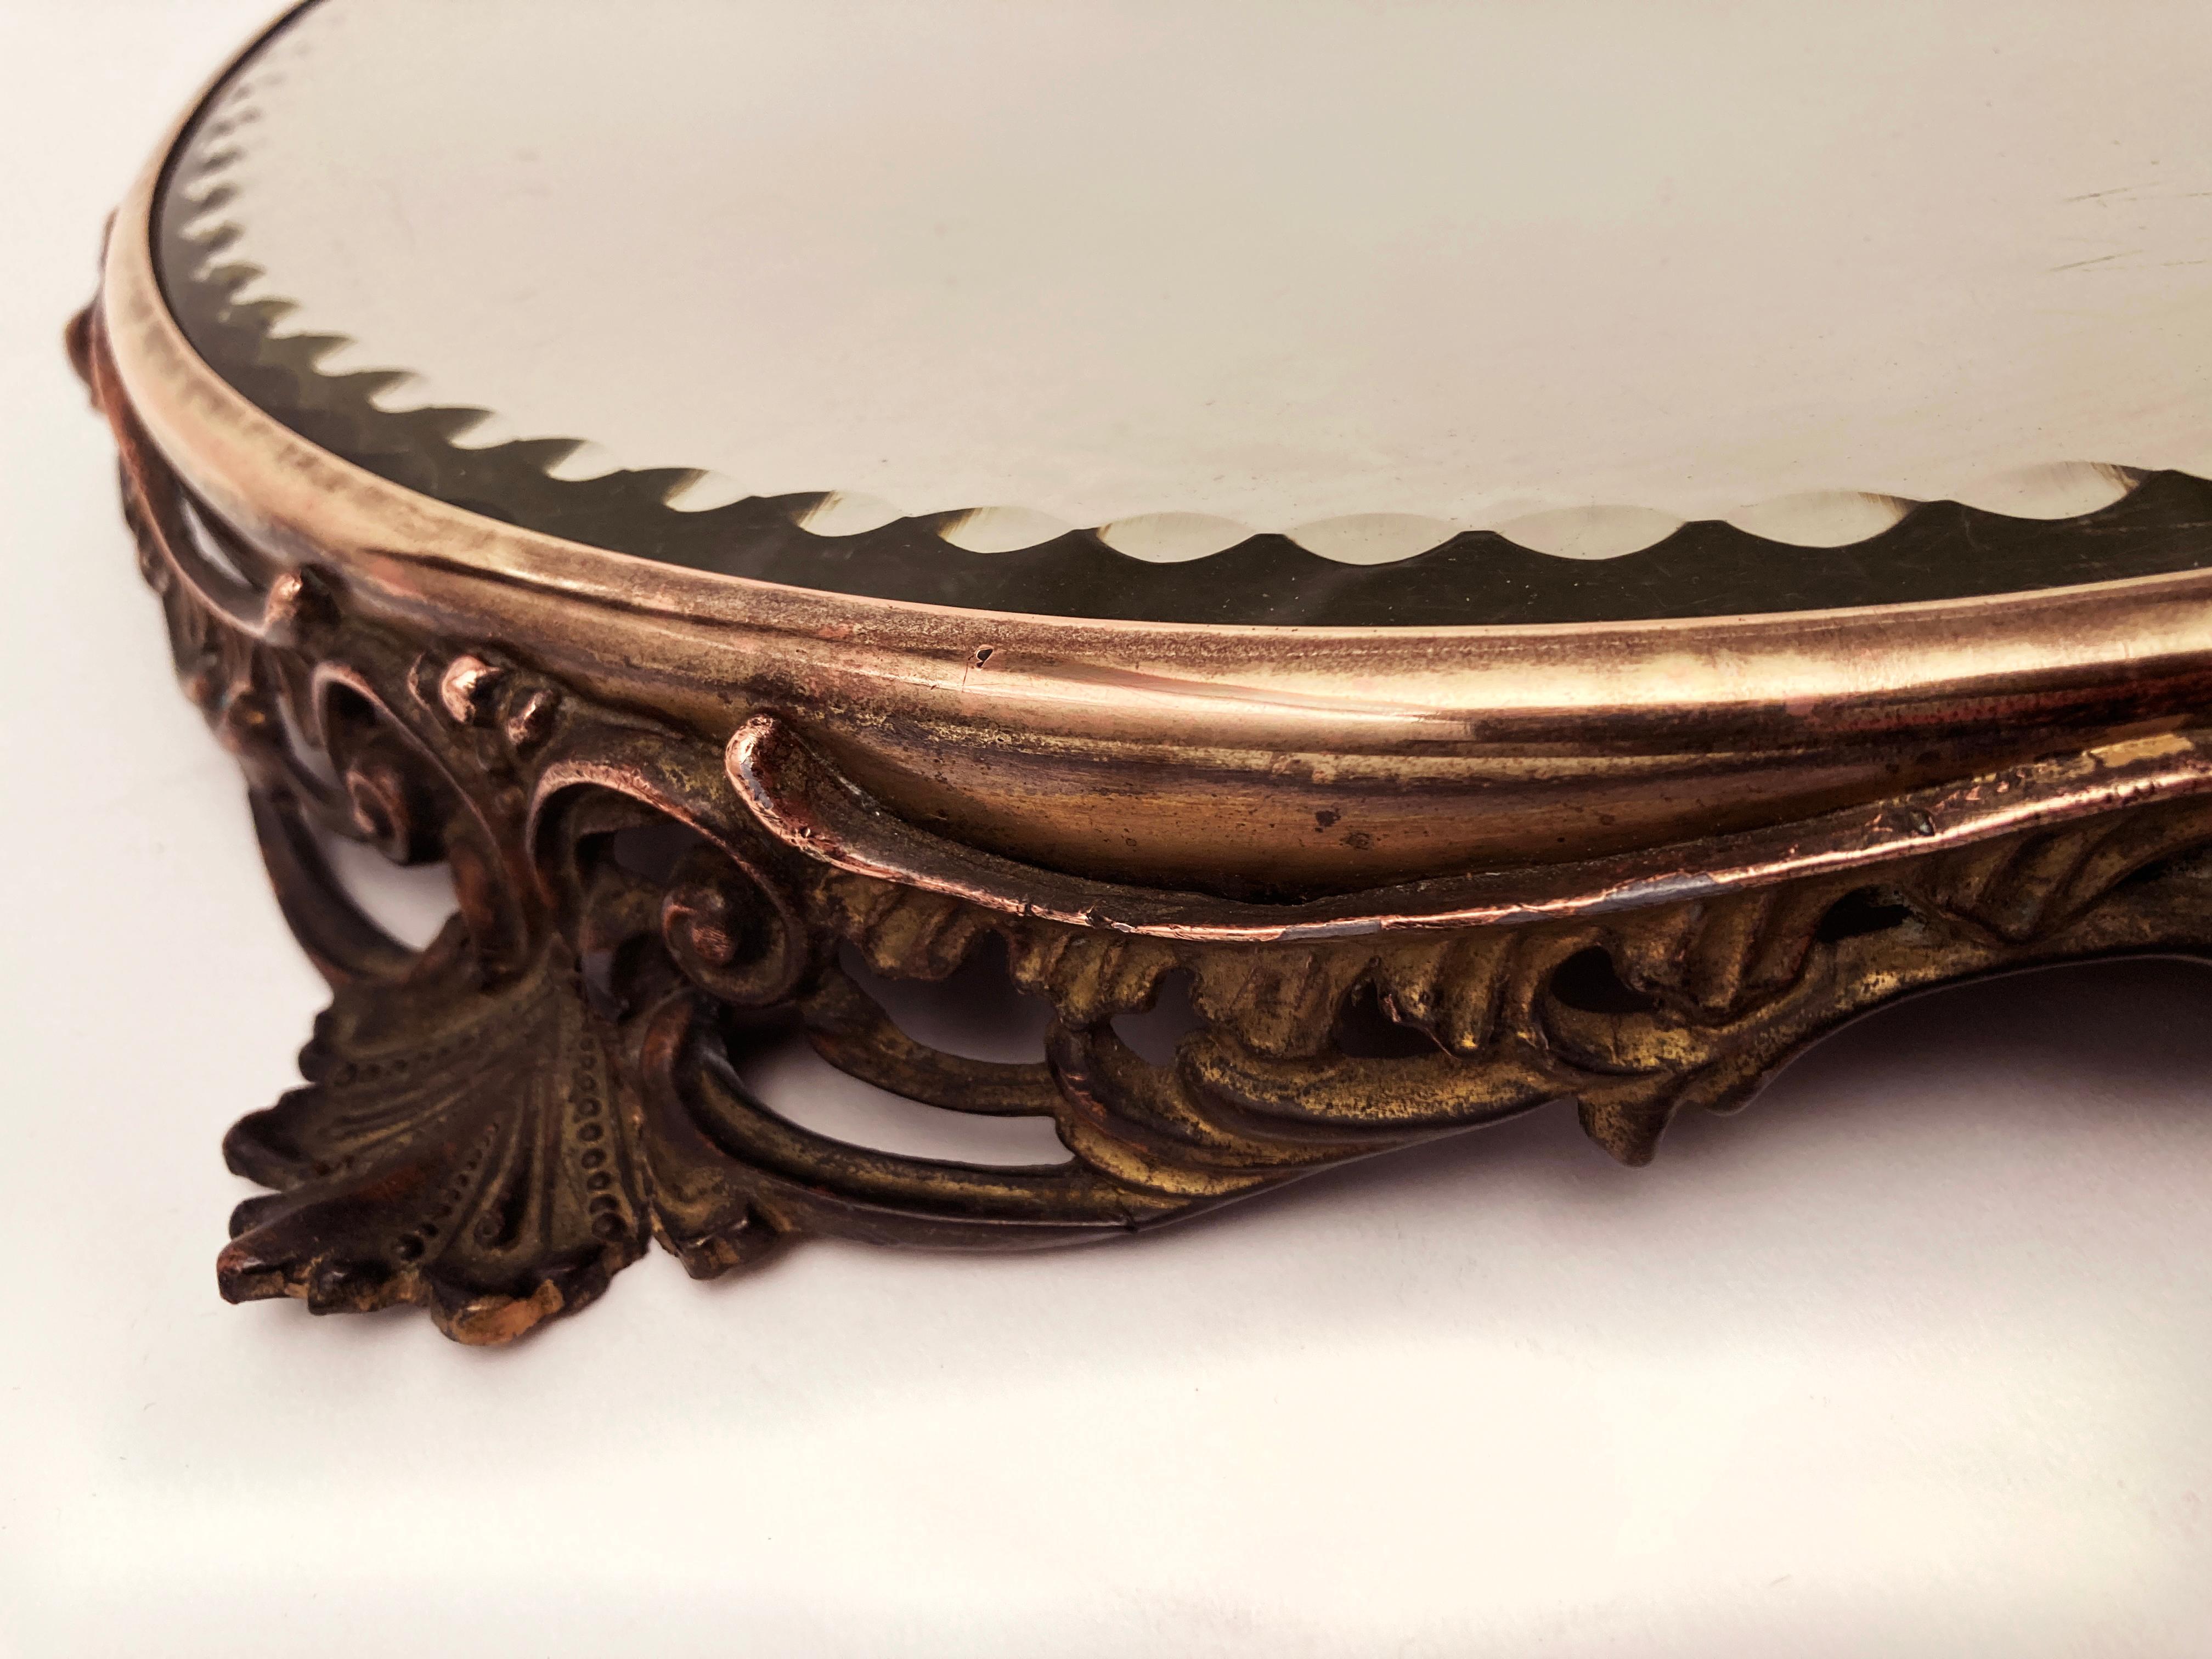 This beautiful and well patinated plateau table mirror is perfect for those who want something texturally unique with depth and richness from a period known for ornate detail. The exposed copper is no doubt a result of polishing over the years. But,